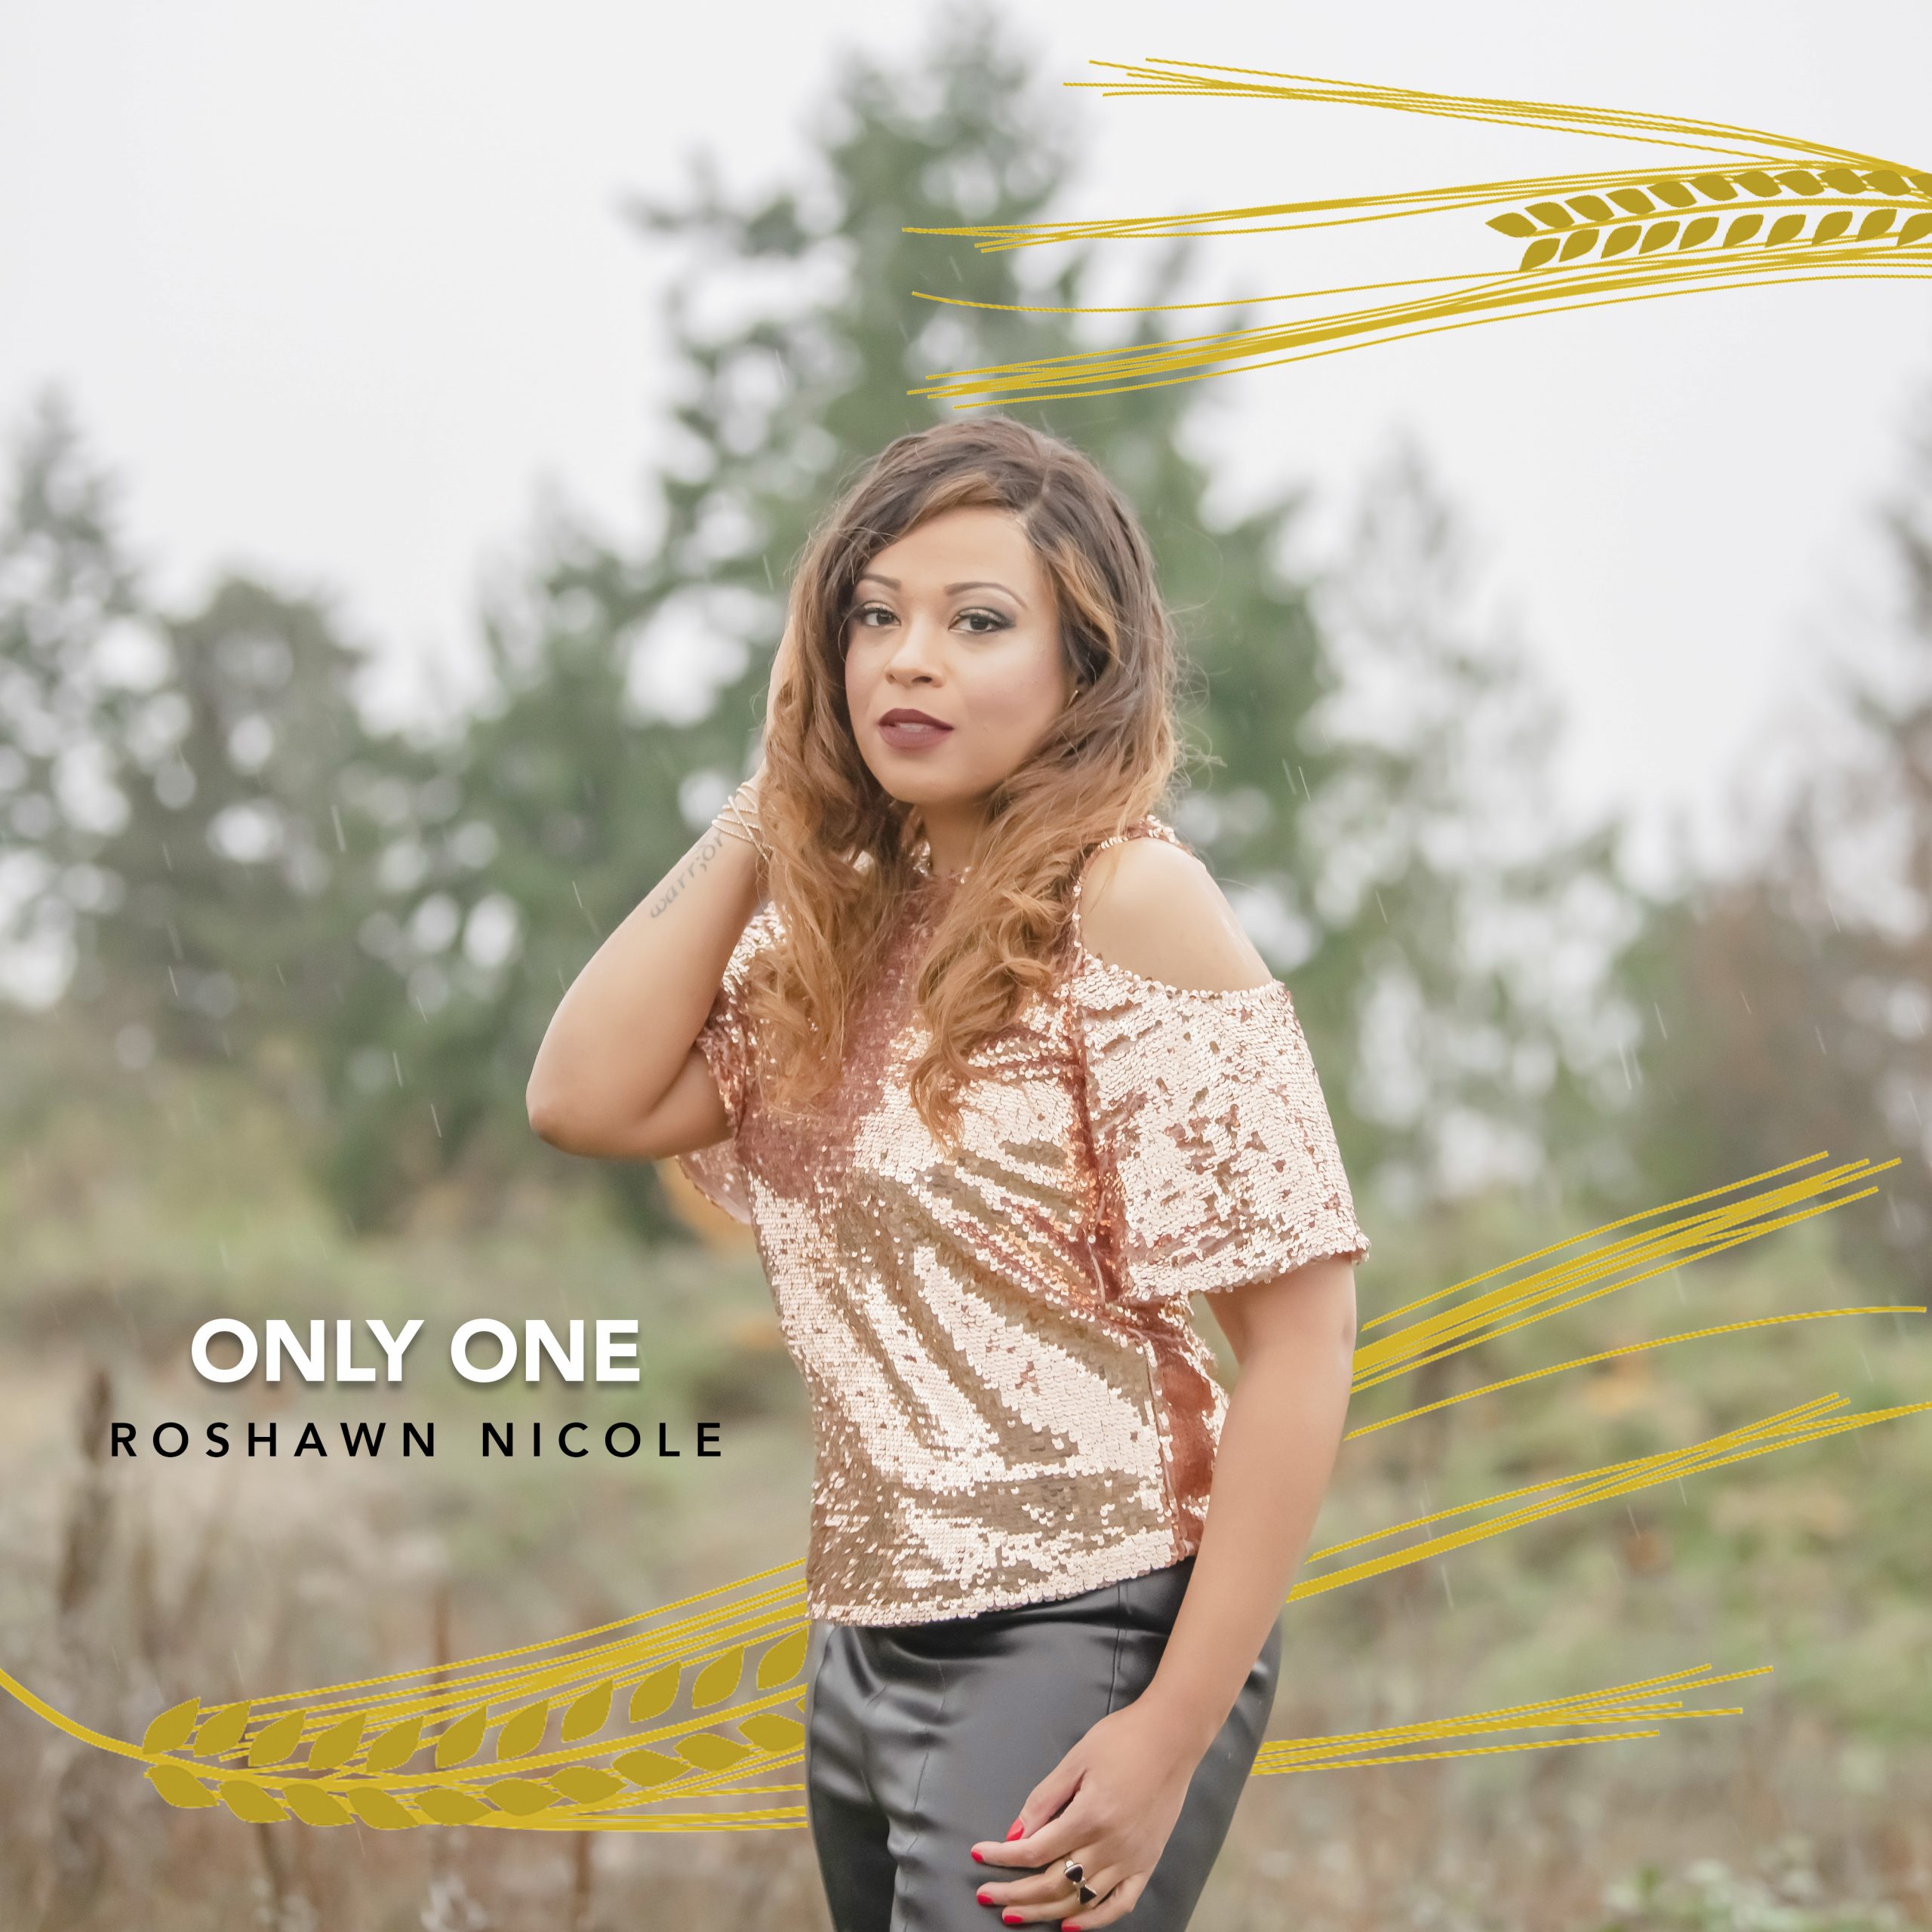 ‘Only One’ from ‘Roshawn Nicole’ tells the story of healing and finding hope in God.